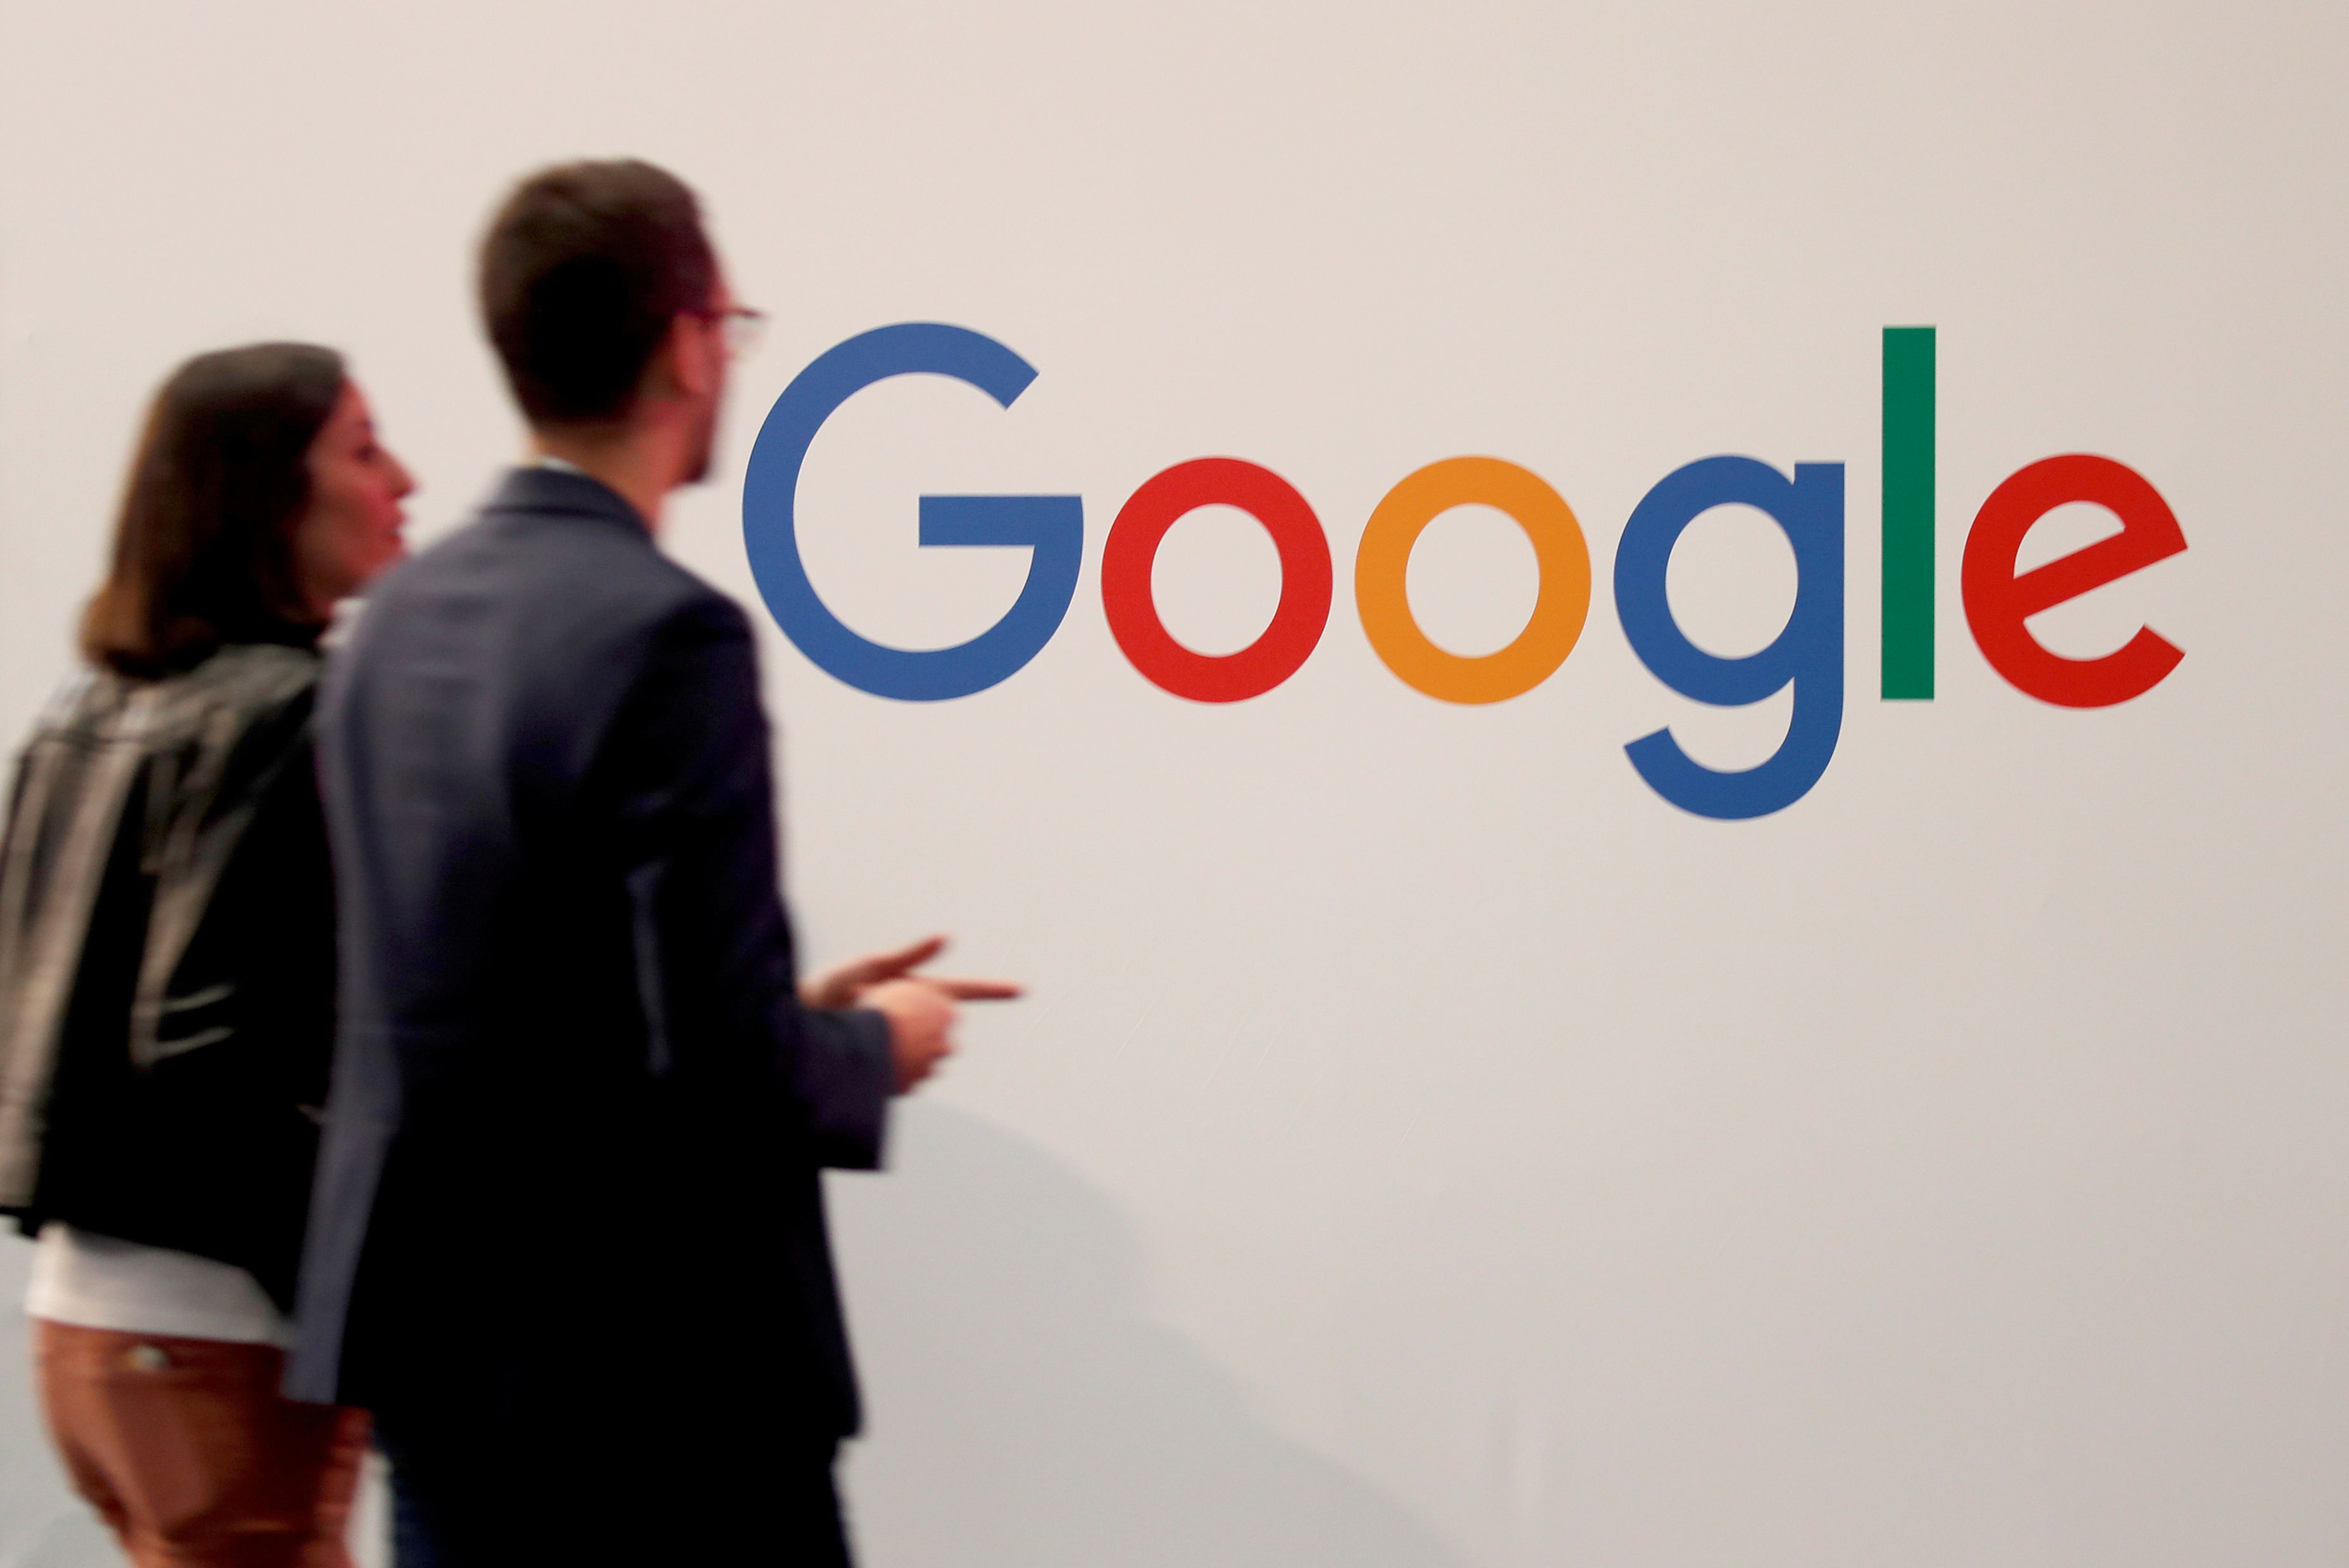 The Google logo is seen at an event in Paris. (Reuters Photo)